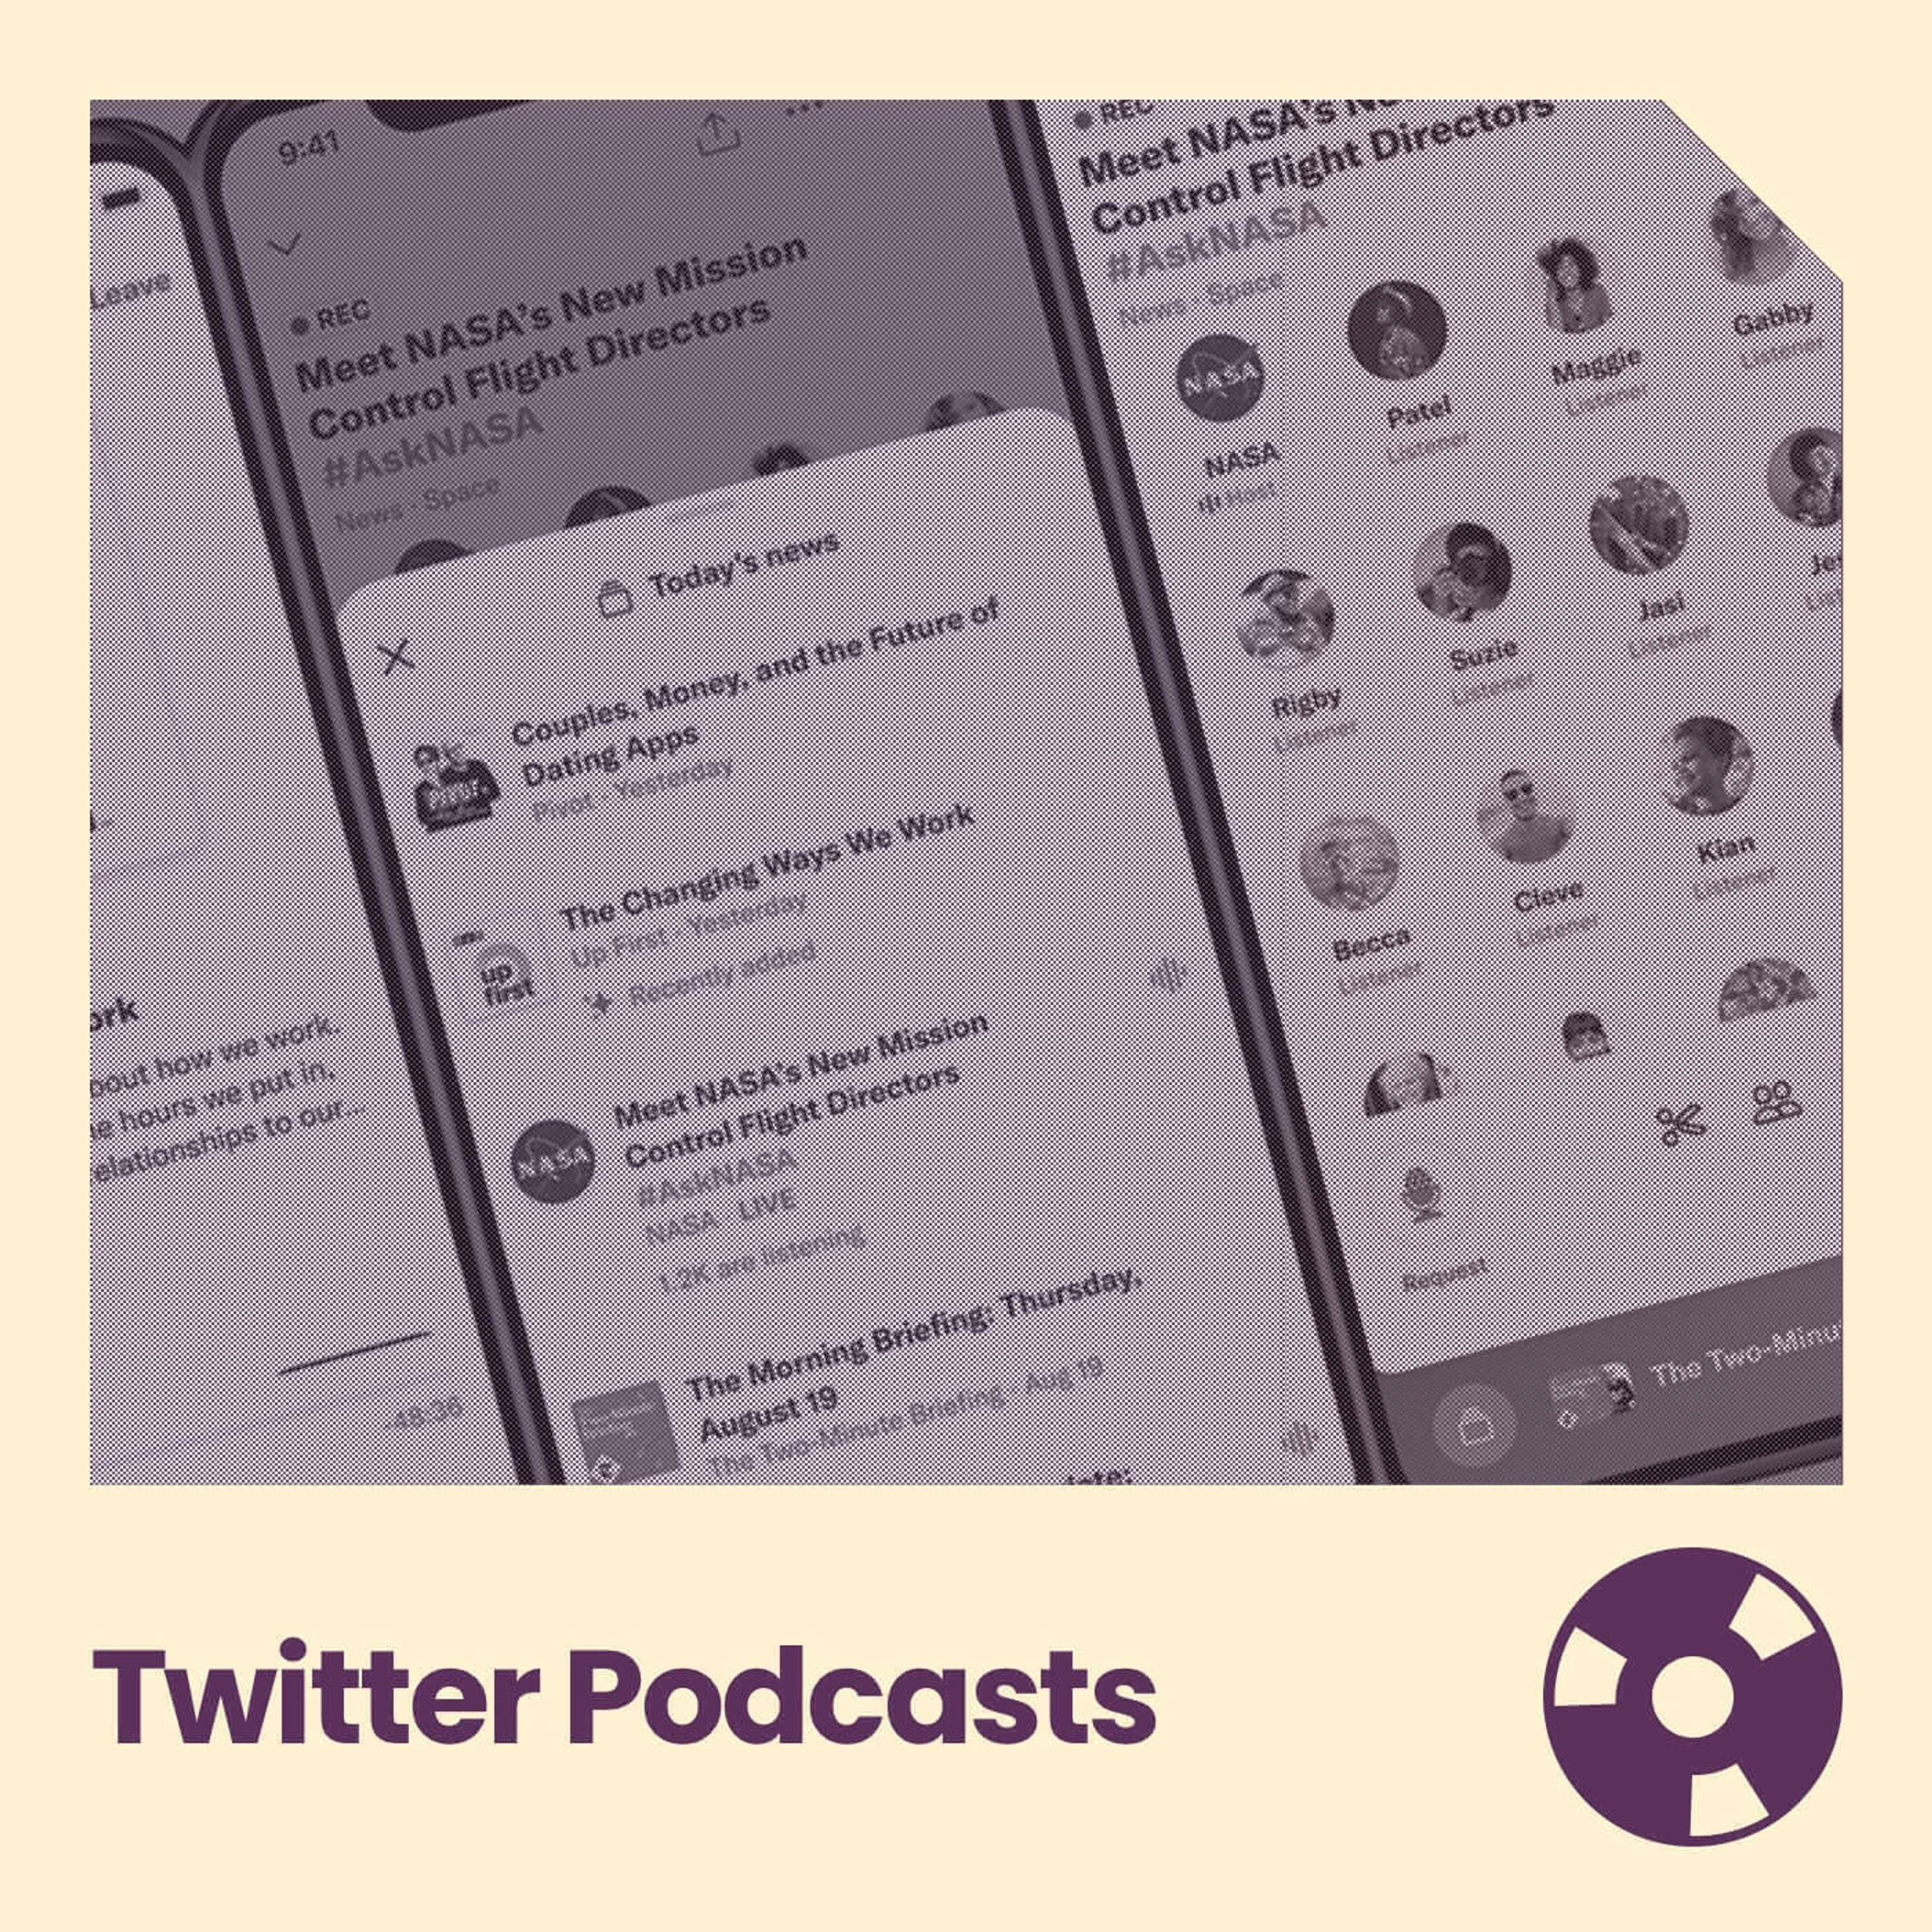 Why Twitter's Podcast Feature May Not Be Good for Podcasters